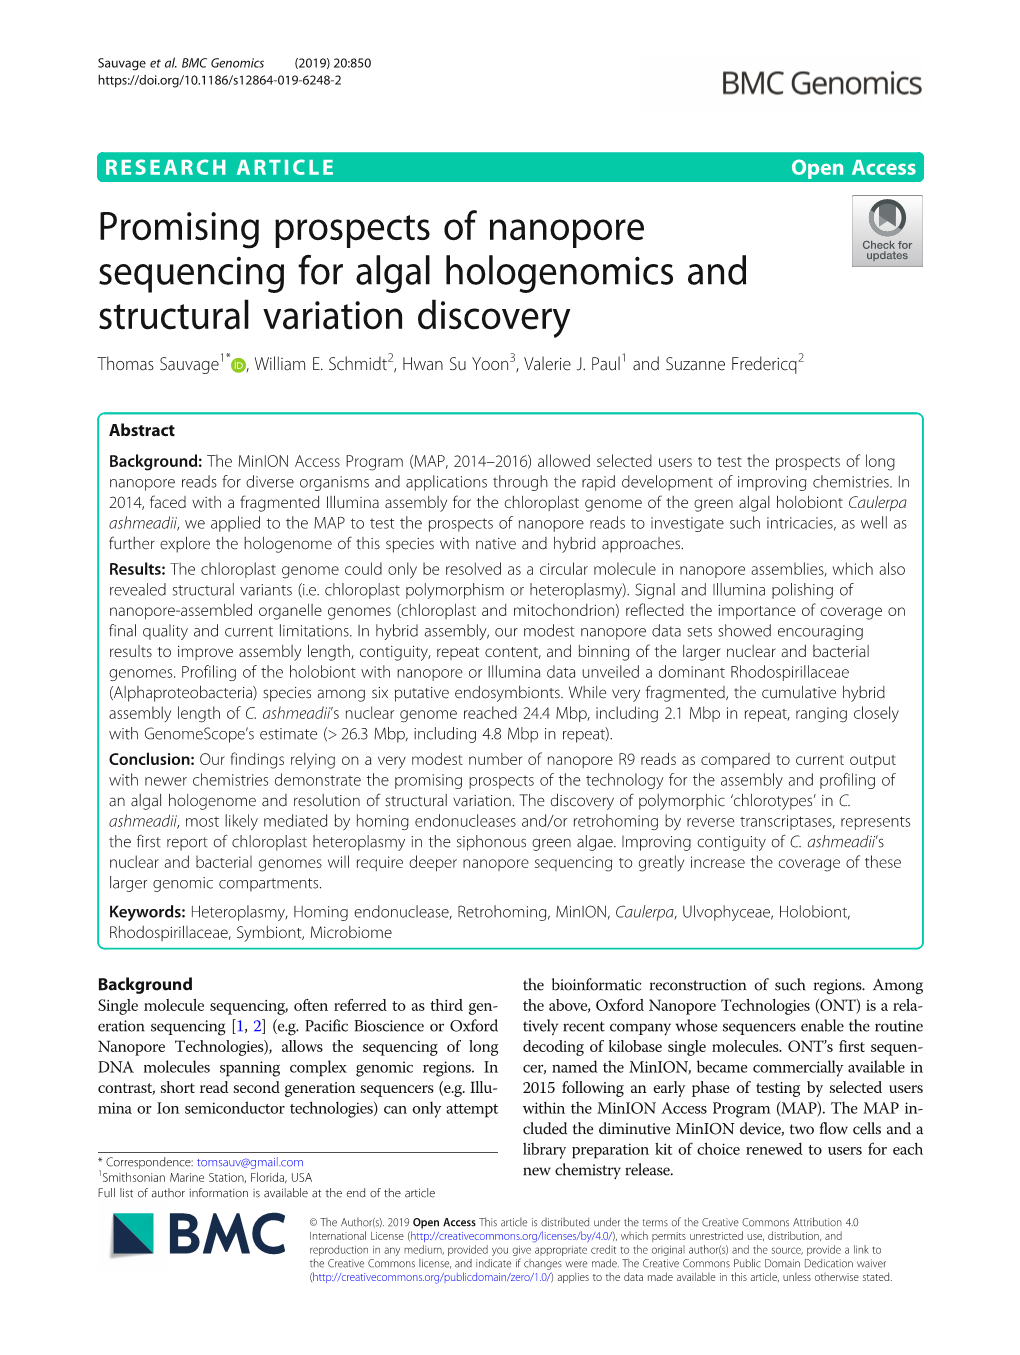 Promising Prospects of Nanopore Sequencing for Algal Hologenomics and Structural Variation Discovery Thomas Sauvage1* , William E